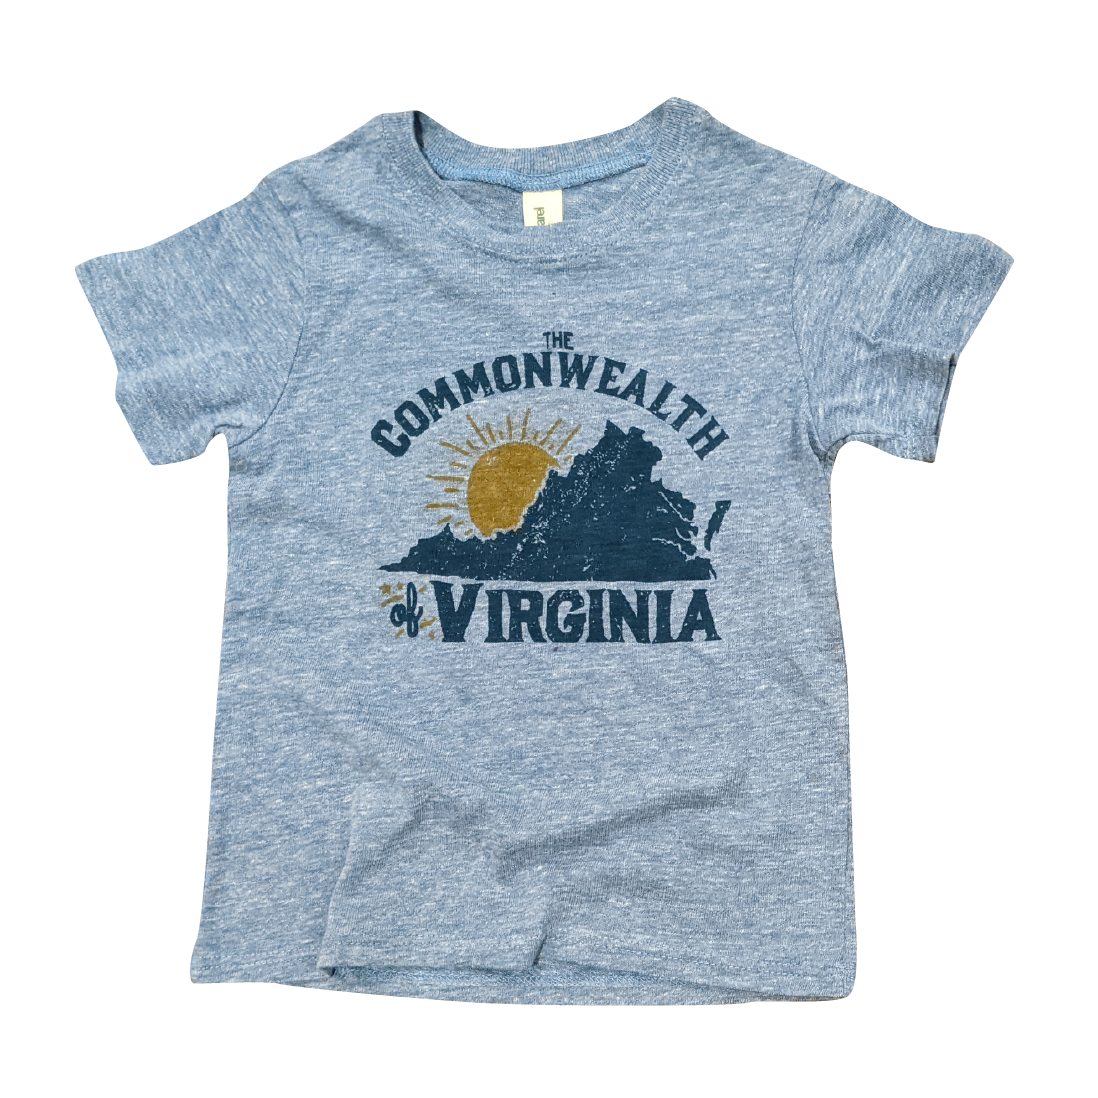 Commonwealth of Virginia Toddler T-shirt